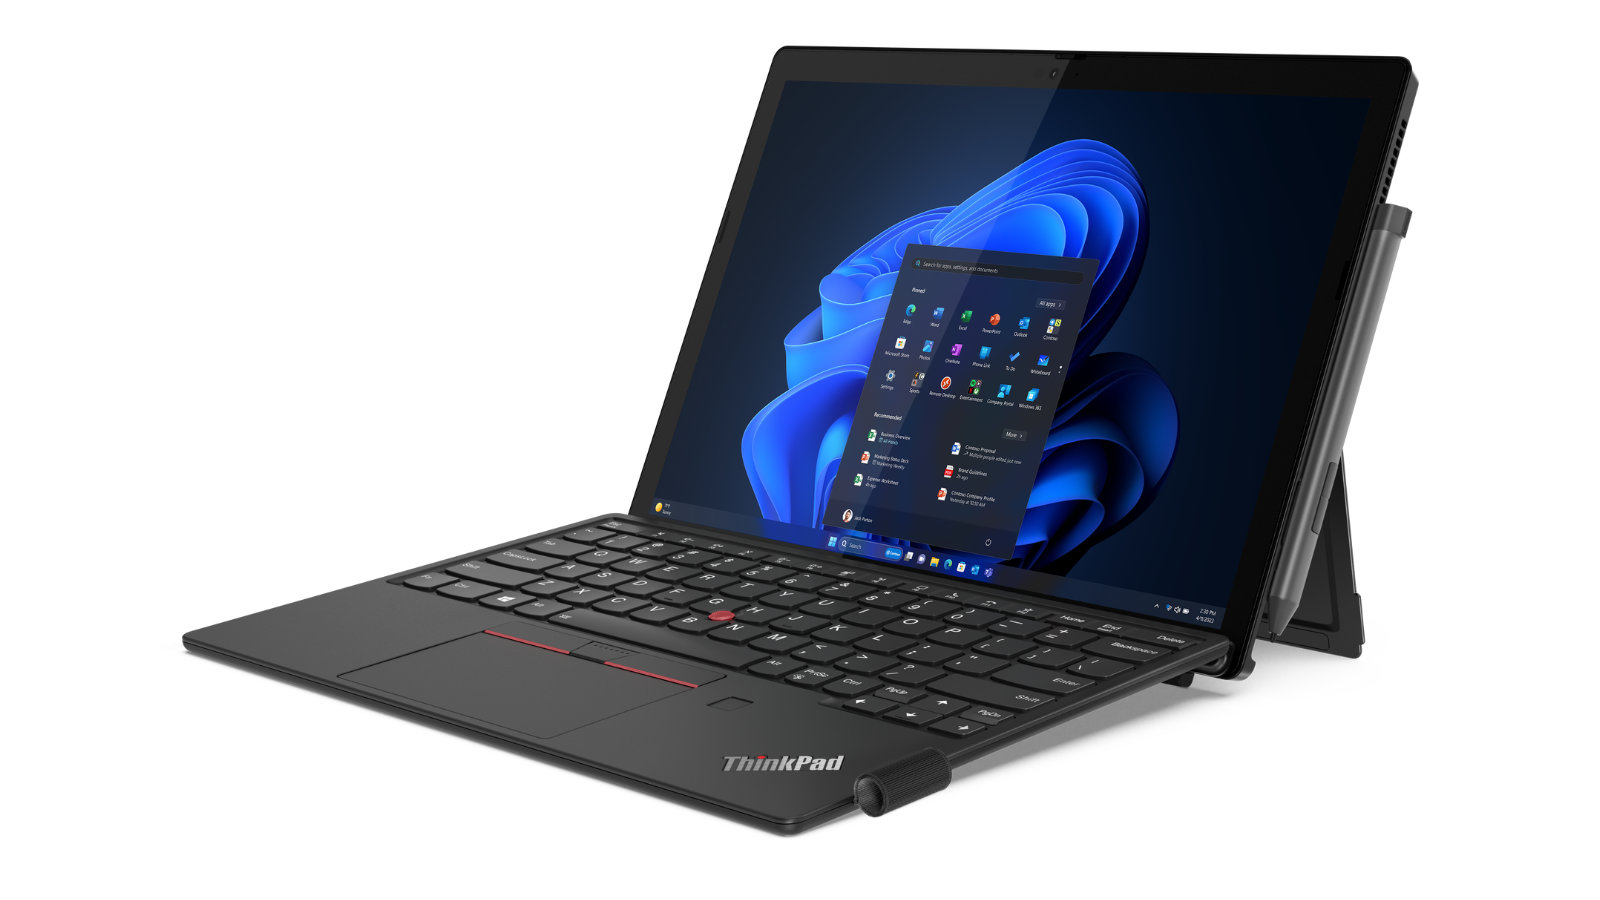 Lenovo takes on Microsoft Surface Pro with the power of Intel Core Ultra, AI, and Wi-Fi 7 — meet the ThinkPad X12 Detachable Gen 2